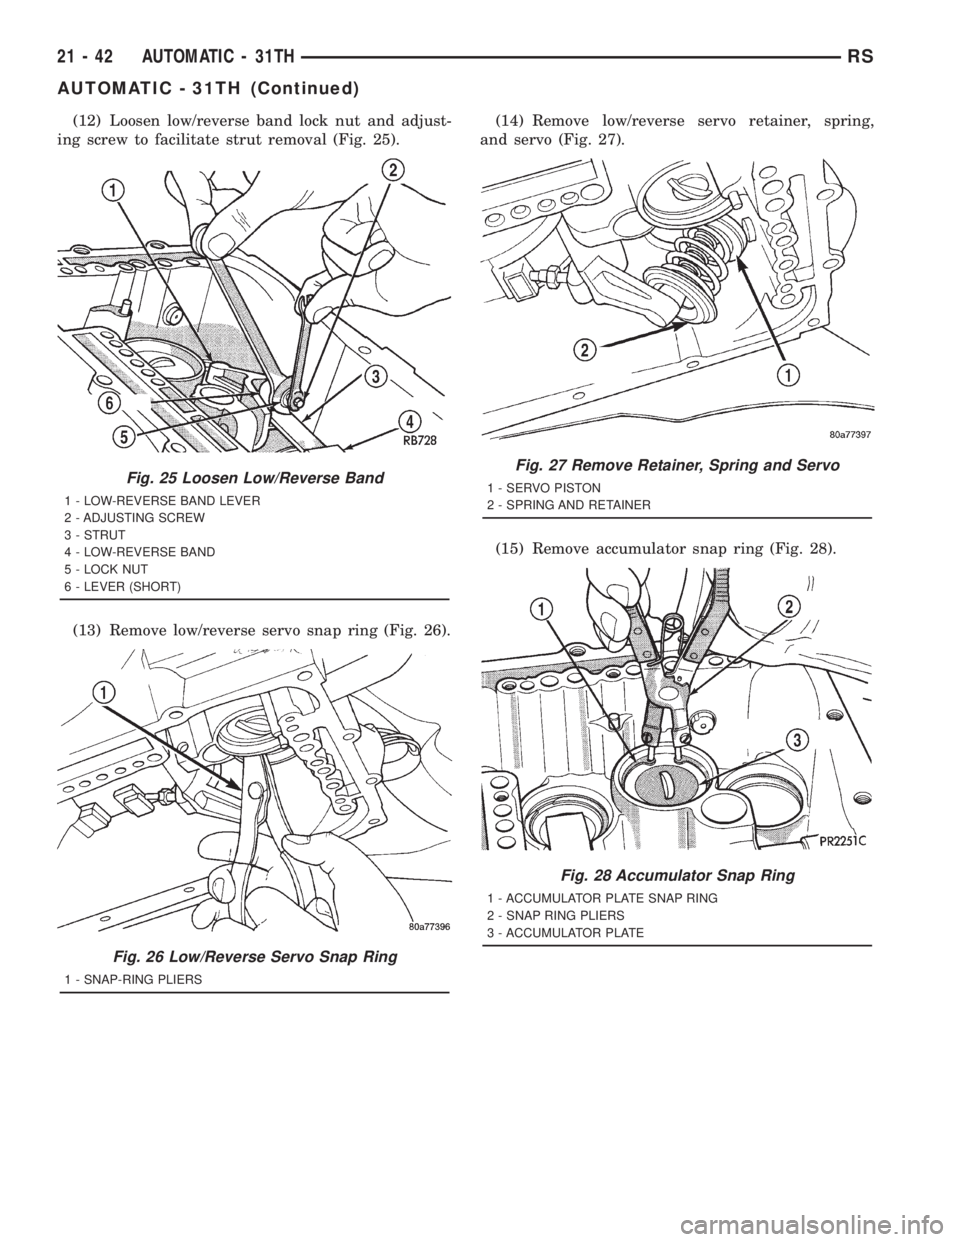 CHRYSLER VOYAGER 2001  Service Manual (12) Loosen low/reverse band lock nut and adjust-
ing screw to facilitate strut removal (Fig. 25).
(13) Remove low/reverse servo snap ring (Fig. 26).(14) Remove low/reverse servo retainer, spring,
and